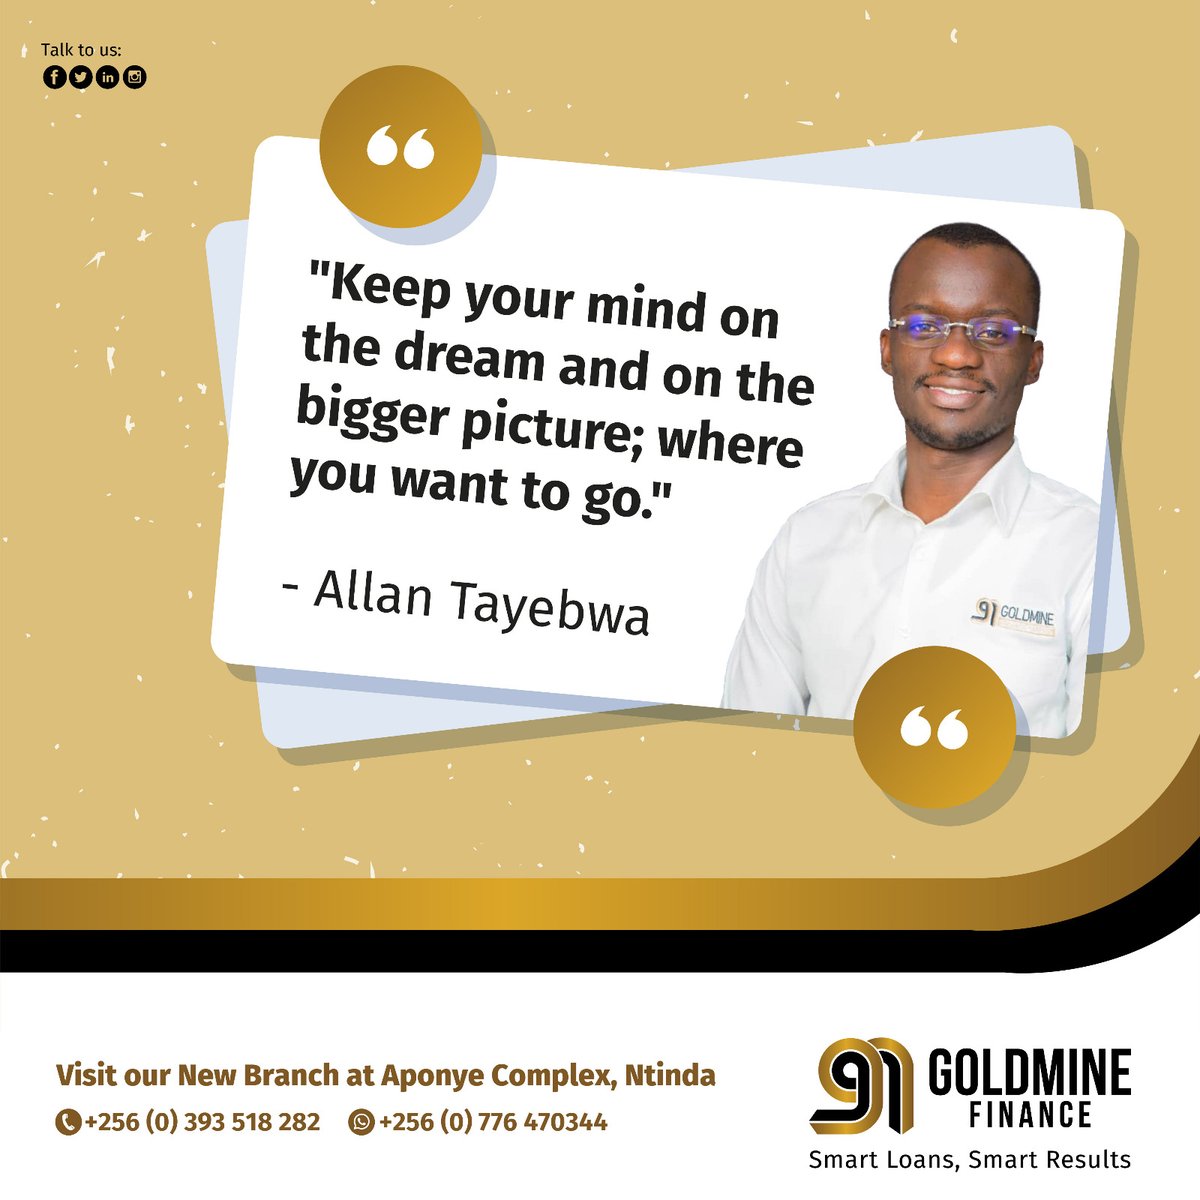 Allow your dream to drive you. 

Our biggest challenge, sometimes, is allowing small wins to distract us. Keep your mind on the goal this week. There is still a bigger picture. 

#MondayMotivation #GoldmineFinance #GoForGold